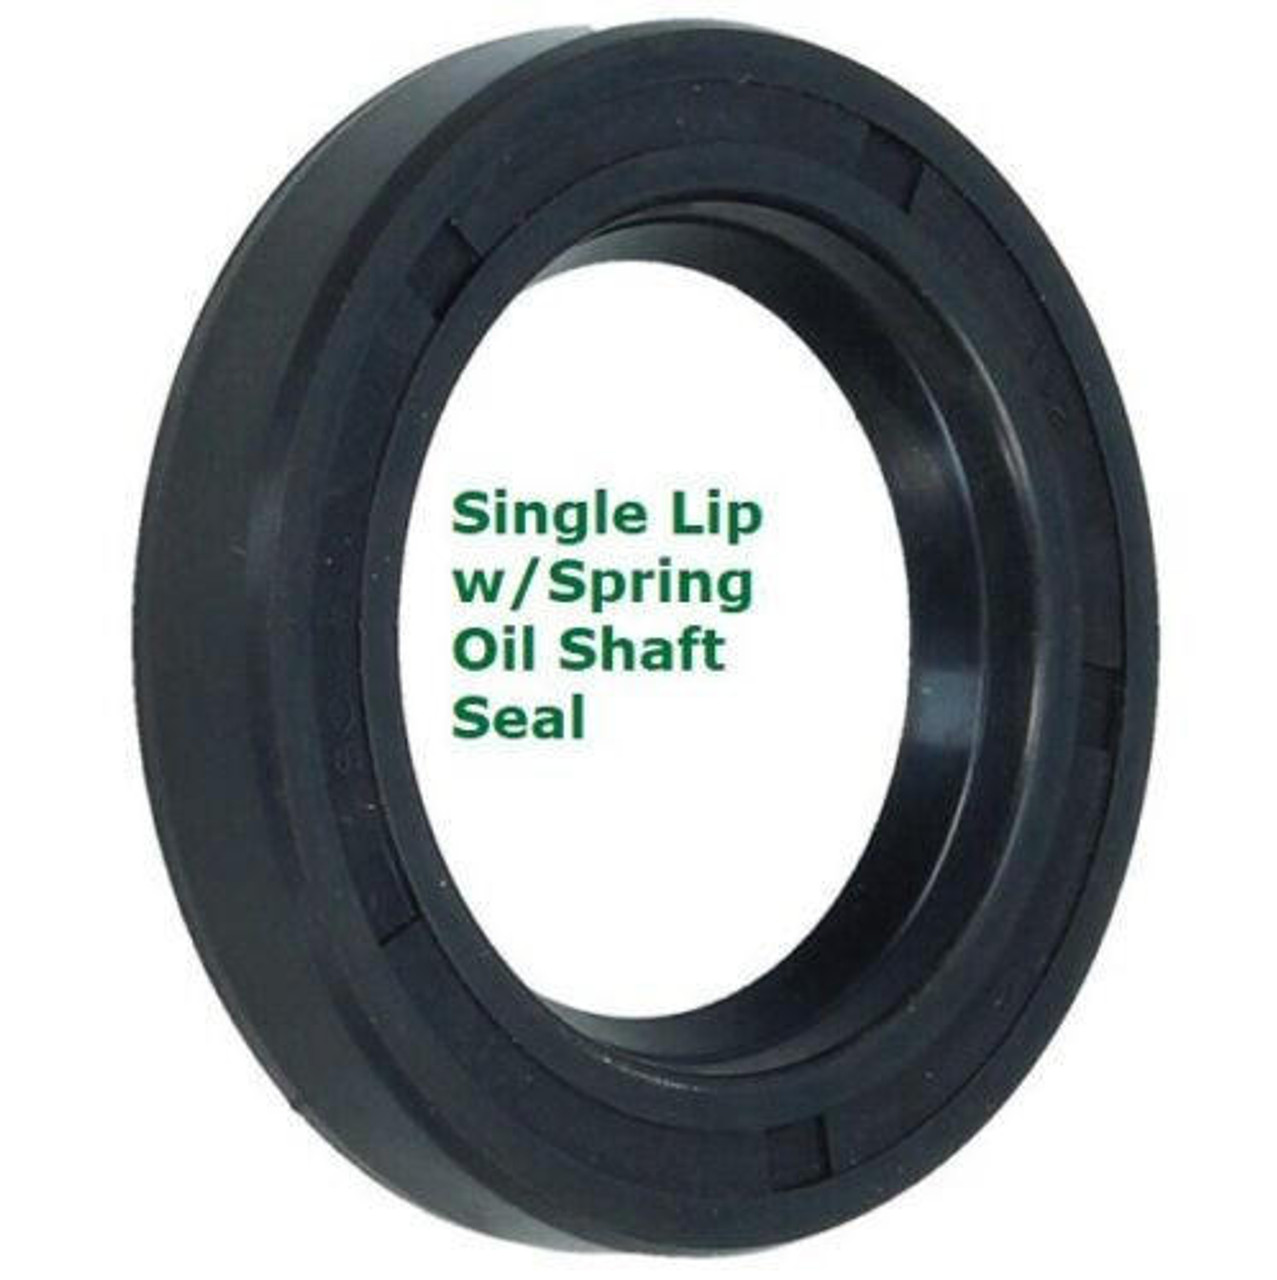 Metric Oil Shaft Seal 72 x 100 x 13mm   Price for 1 pc